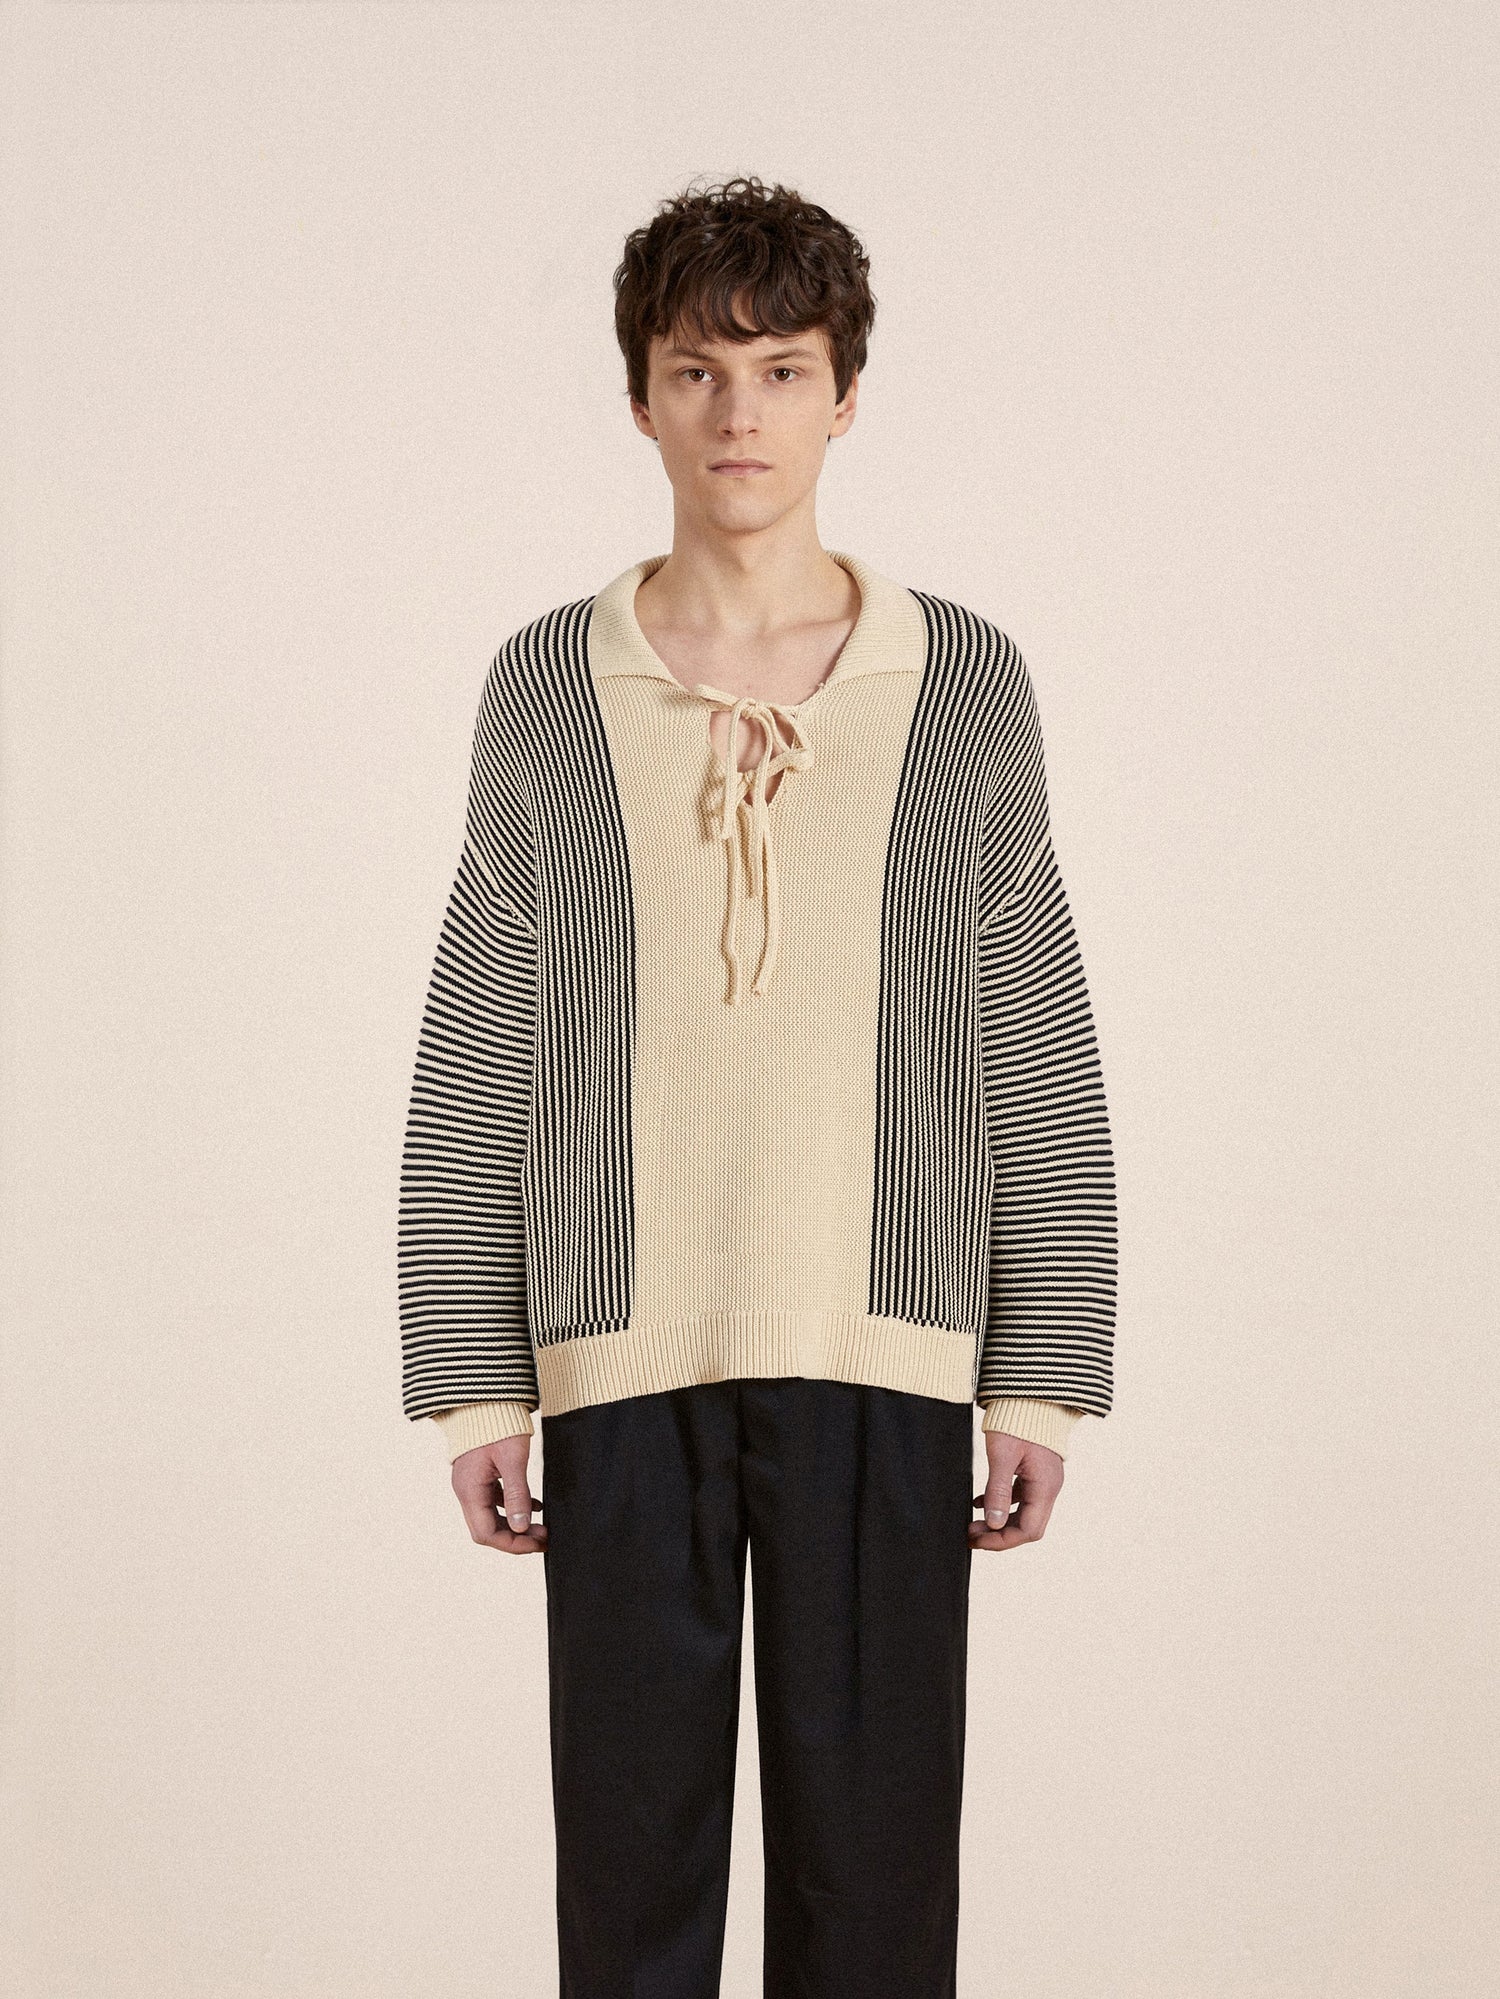 The model is wearing an intricate knit patterns Found Tabas Tie Knit Collared Sweater and black pants.